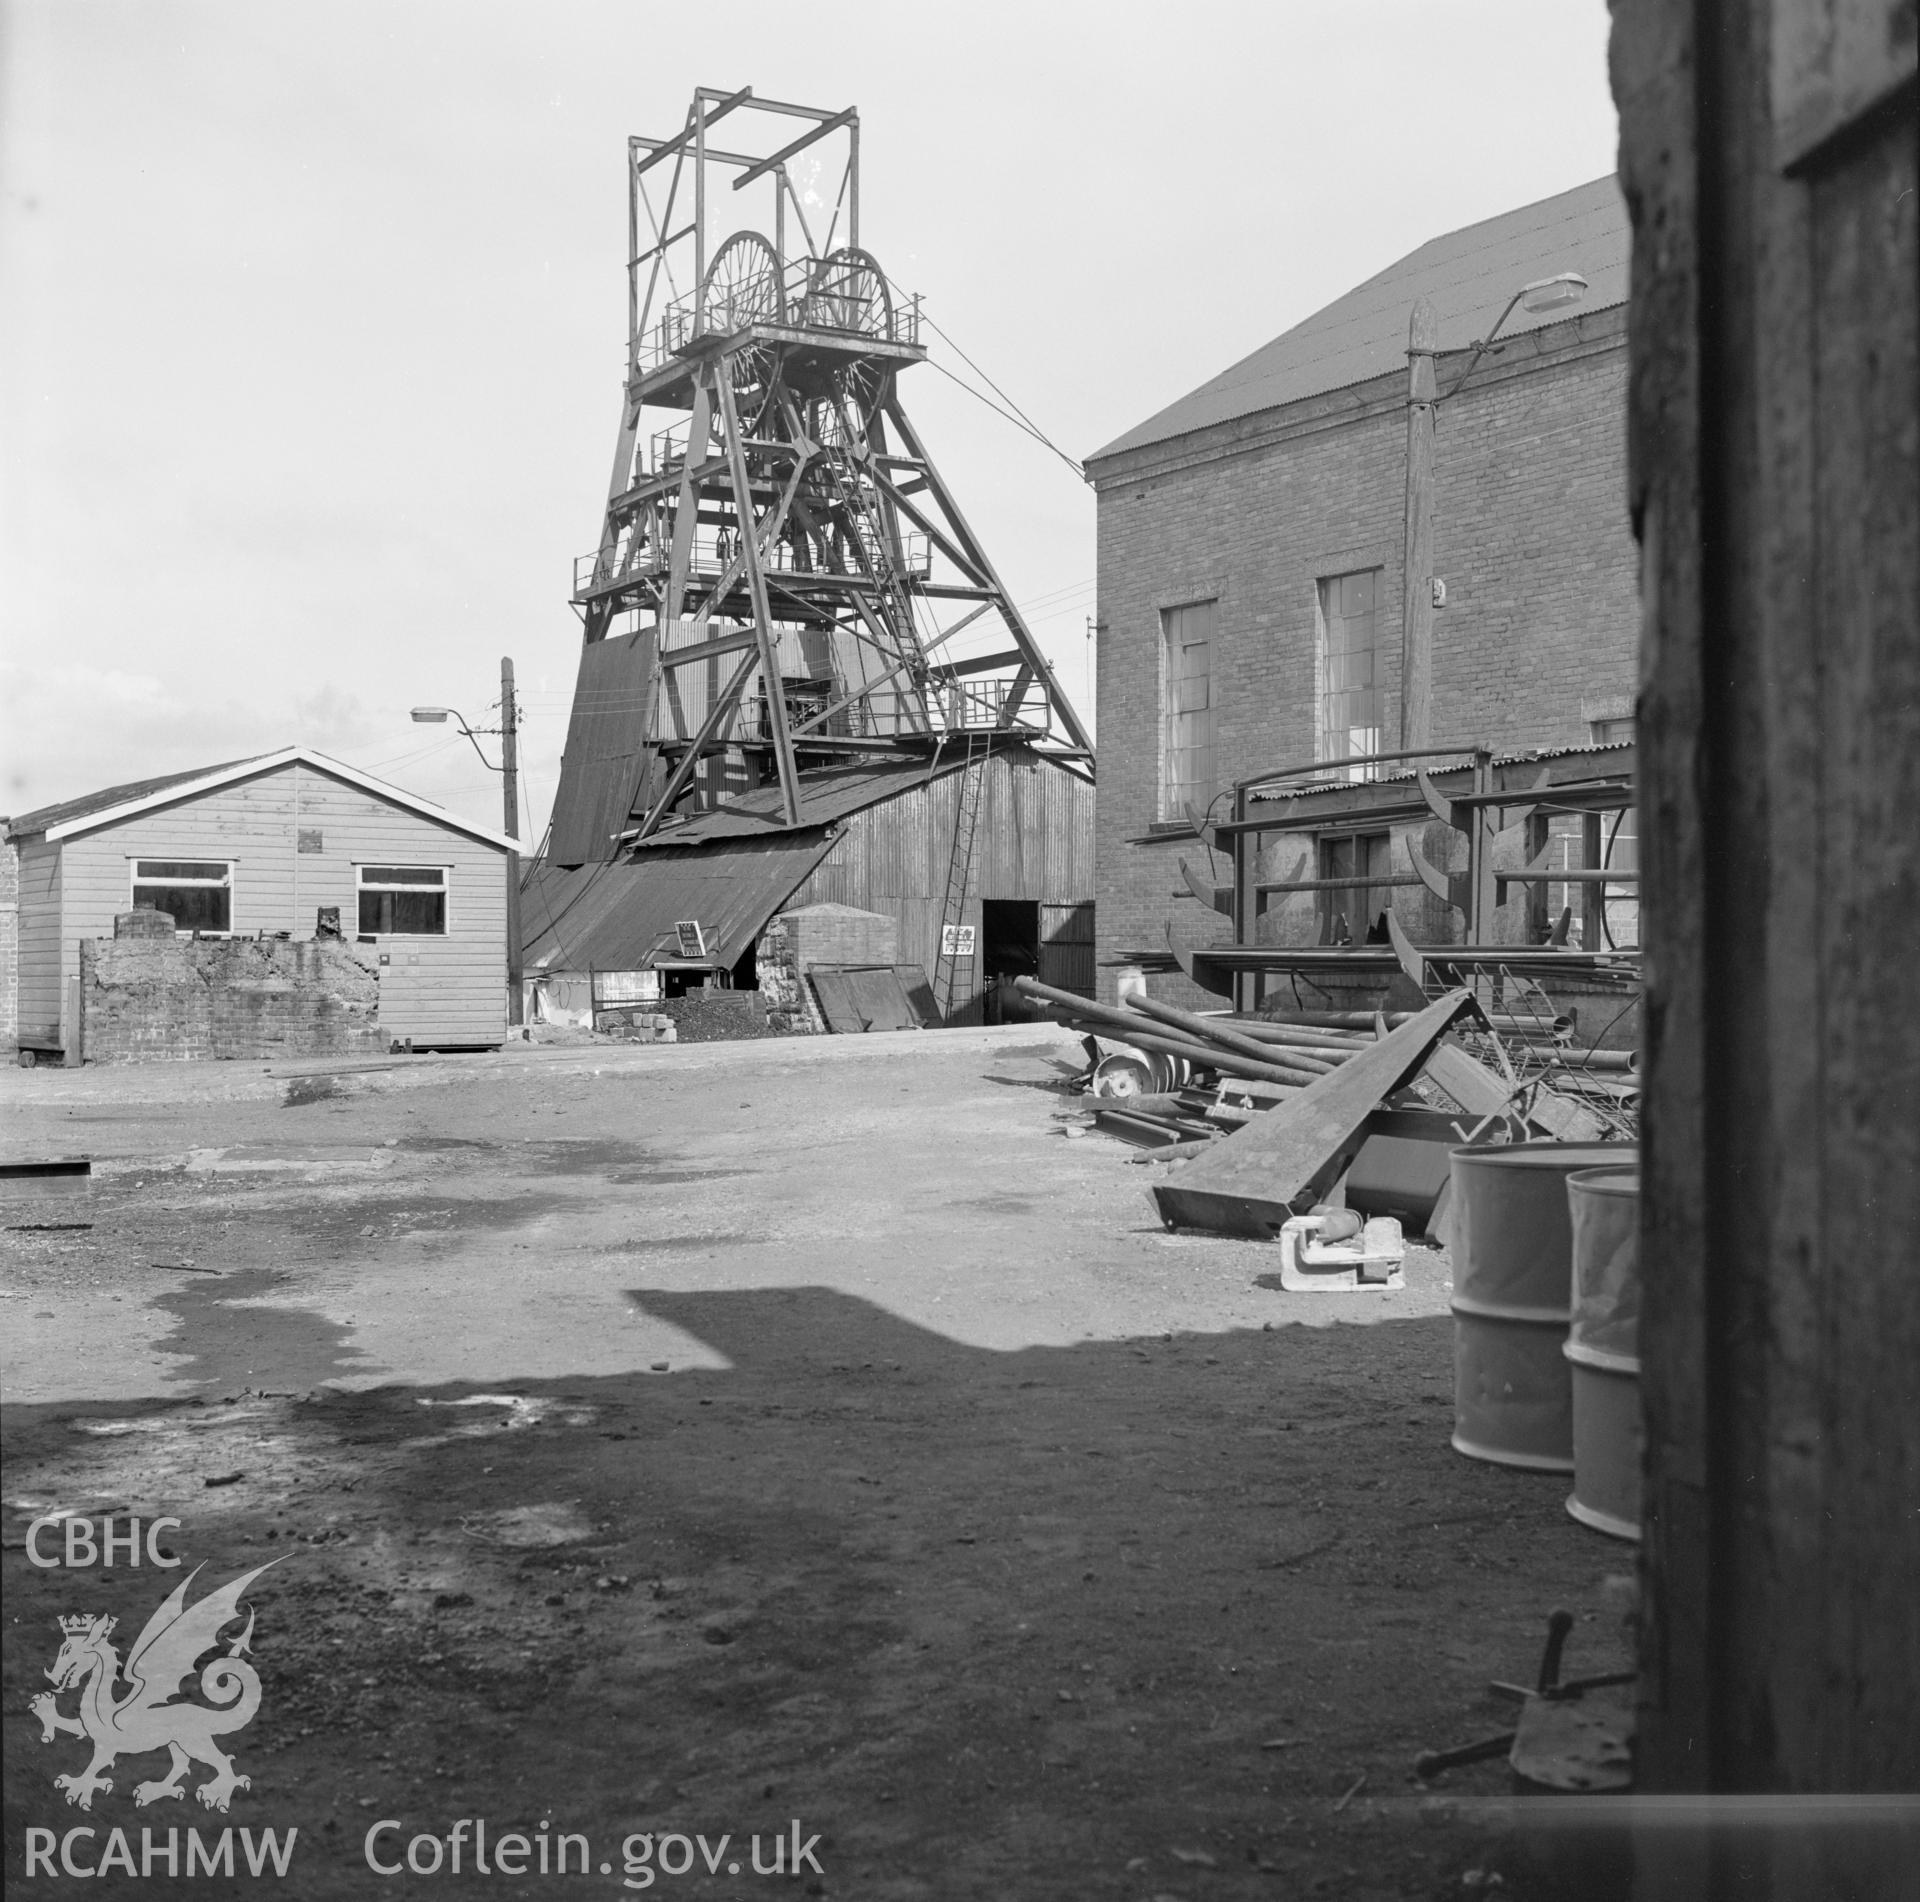 Digital copy of an acetate negative showing headframe from yard of blacksmith's shop at Big Pit, from the John Cornwell Collection.